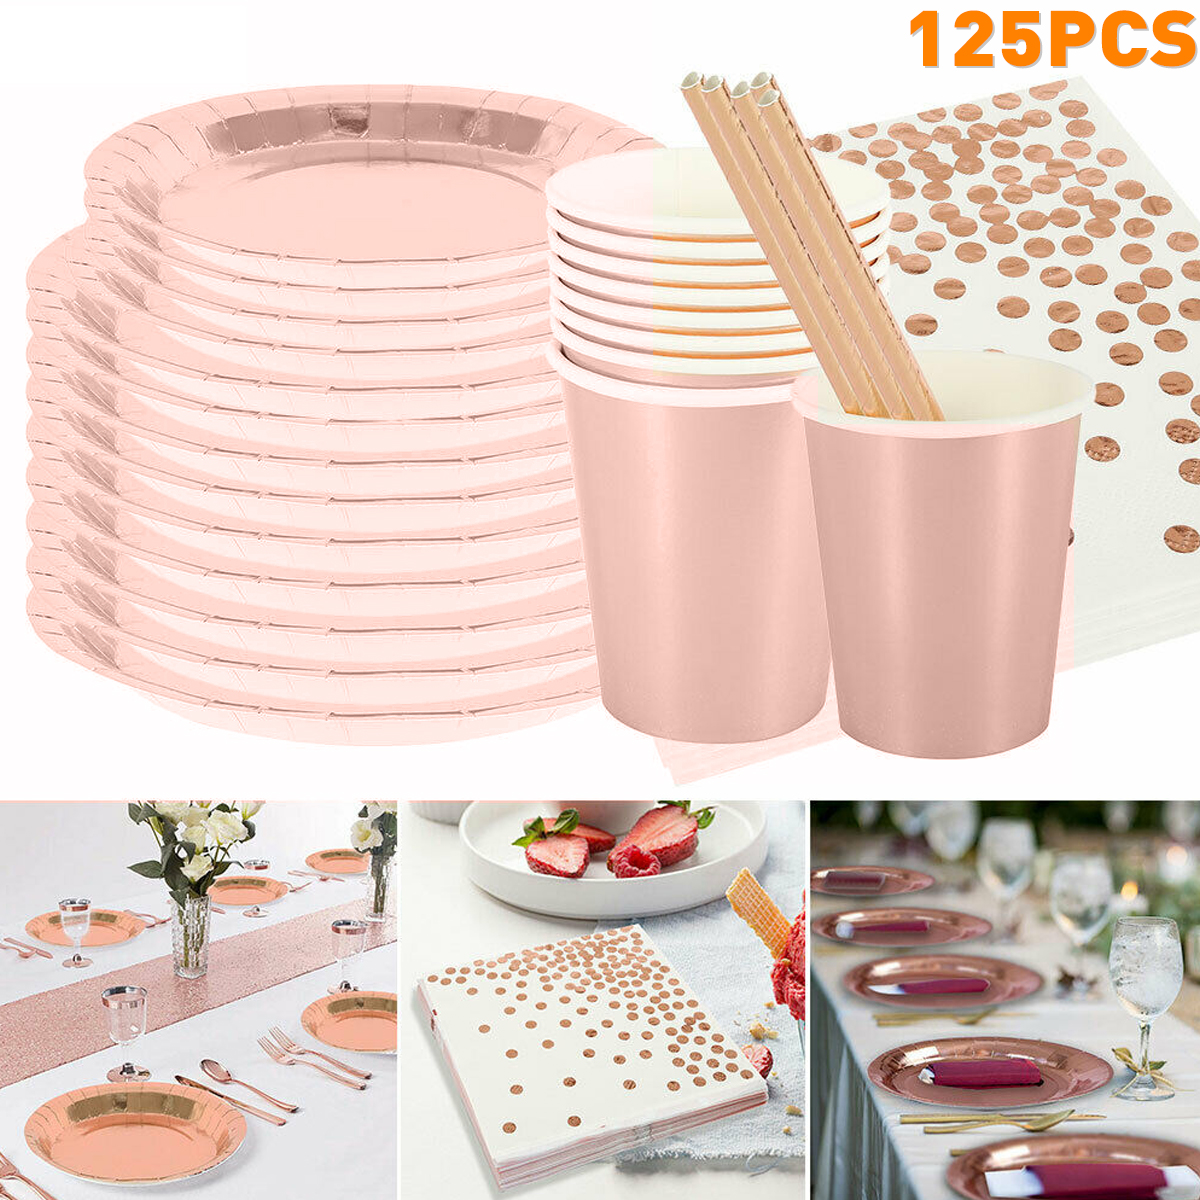 125pcs-Party-Disposable-Tableware-Set-Festival-Paper-Cups-Camping-Fork-Spoon-Rose-Gold-Plates-Straws-1662319-3